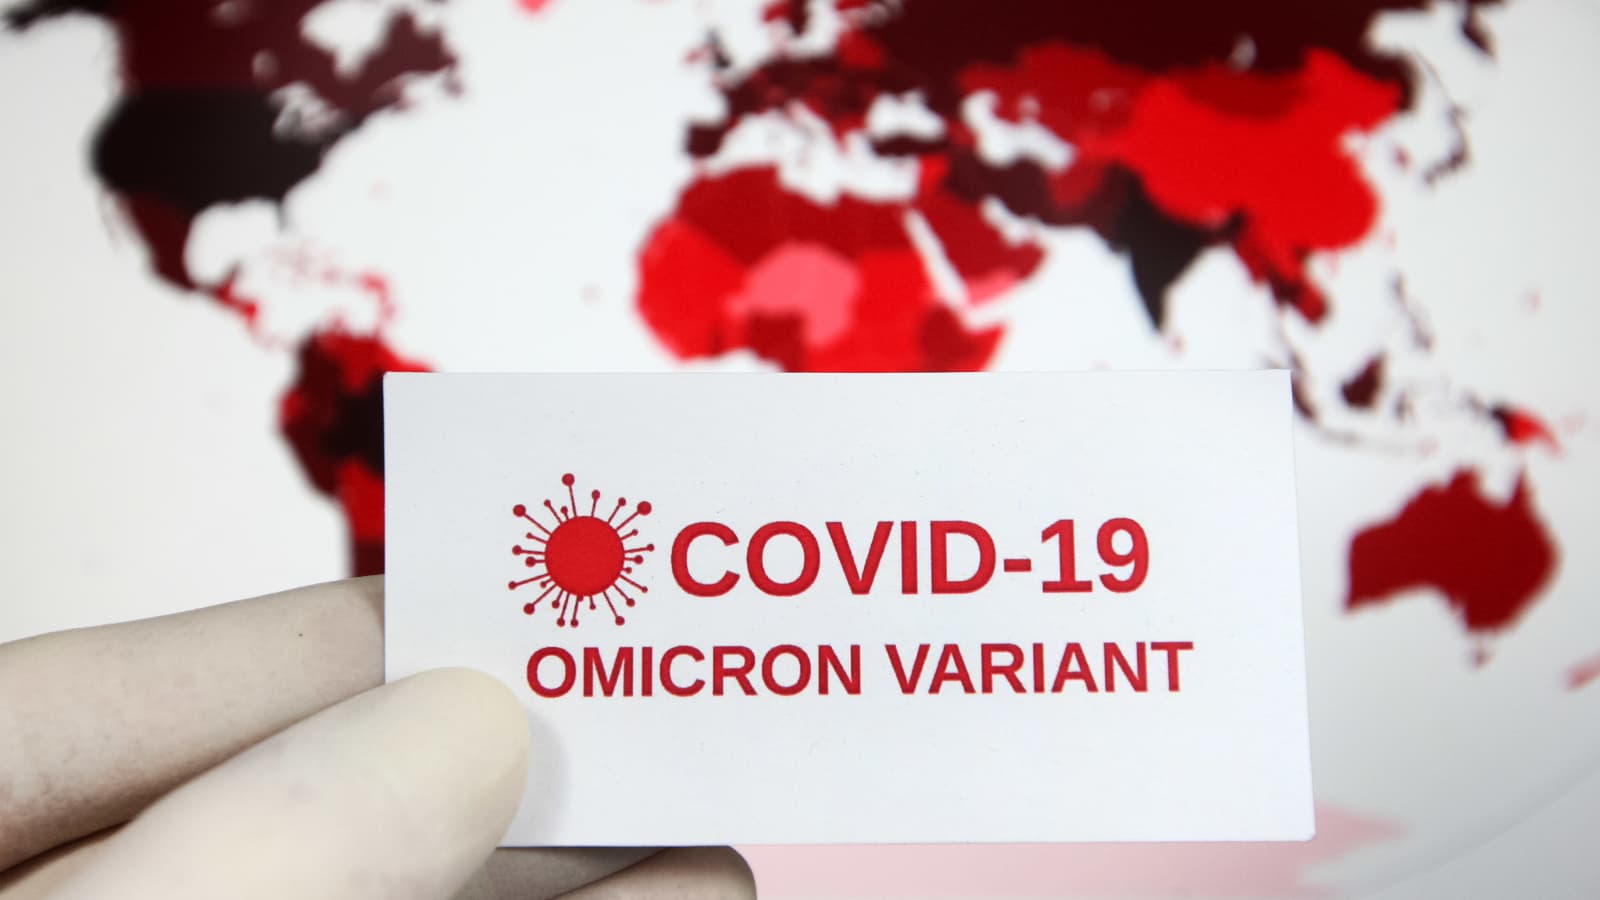 WHO says omicron Covid variant has spread to 38 countries